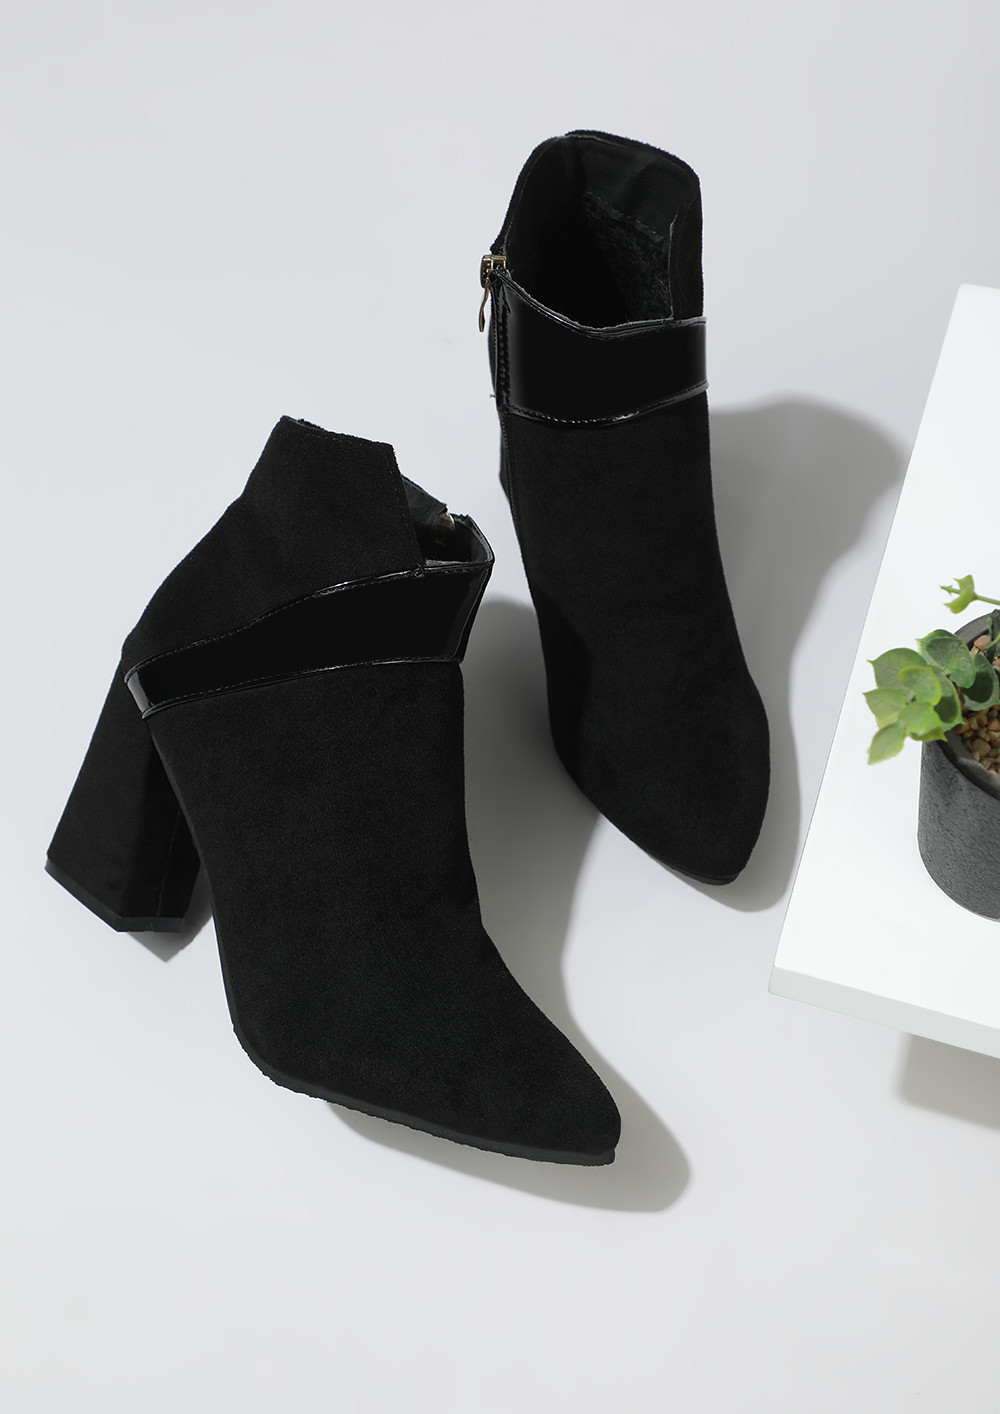 PRETTY NEUTRAL BLACK ANKLE BOOTS